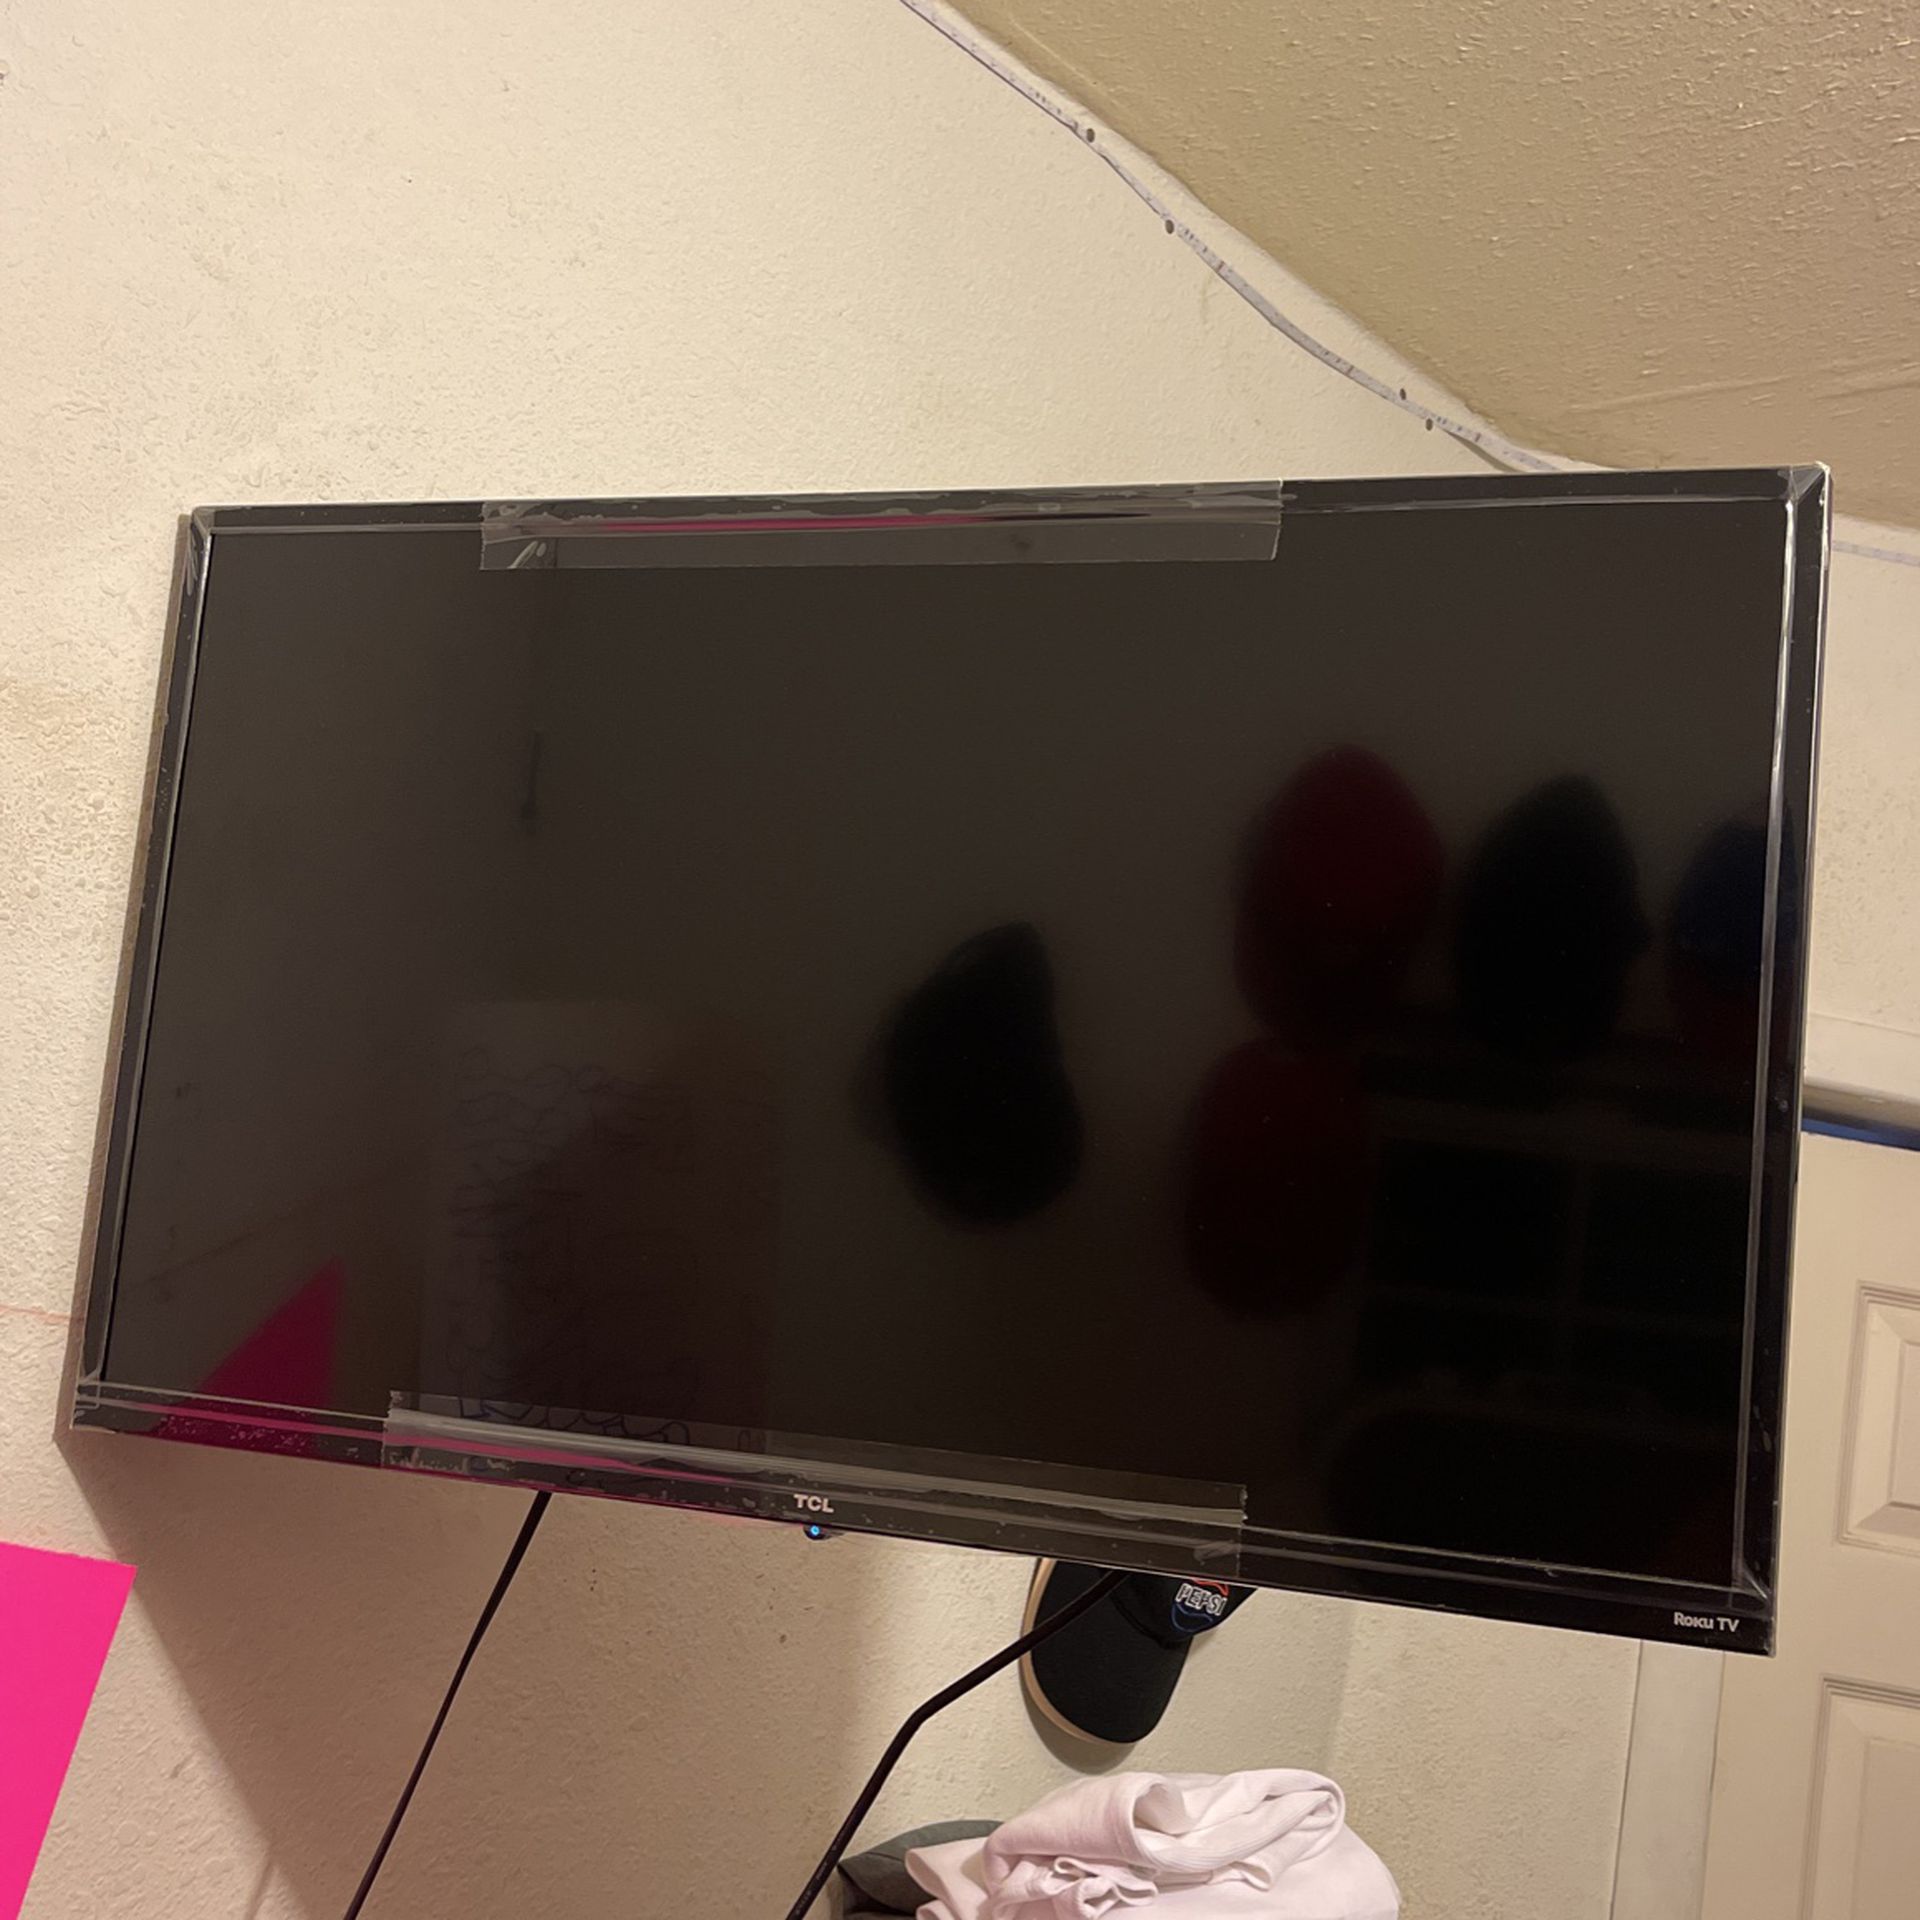 Roku TCL Tv For Sale 